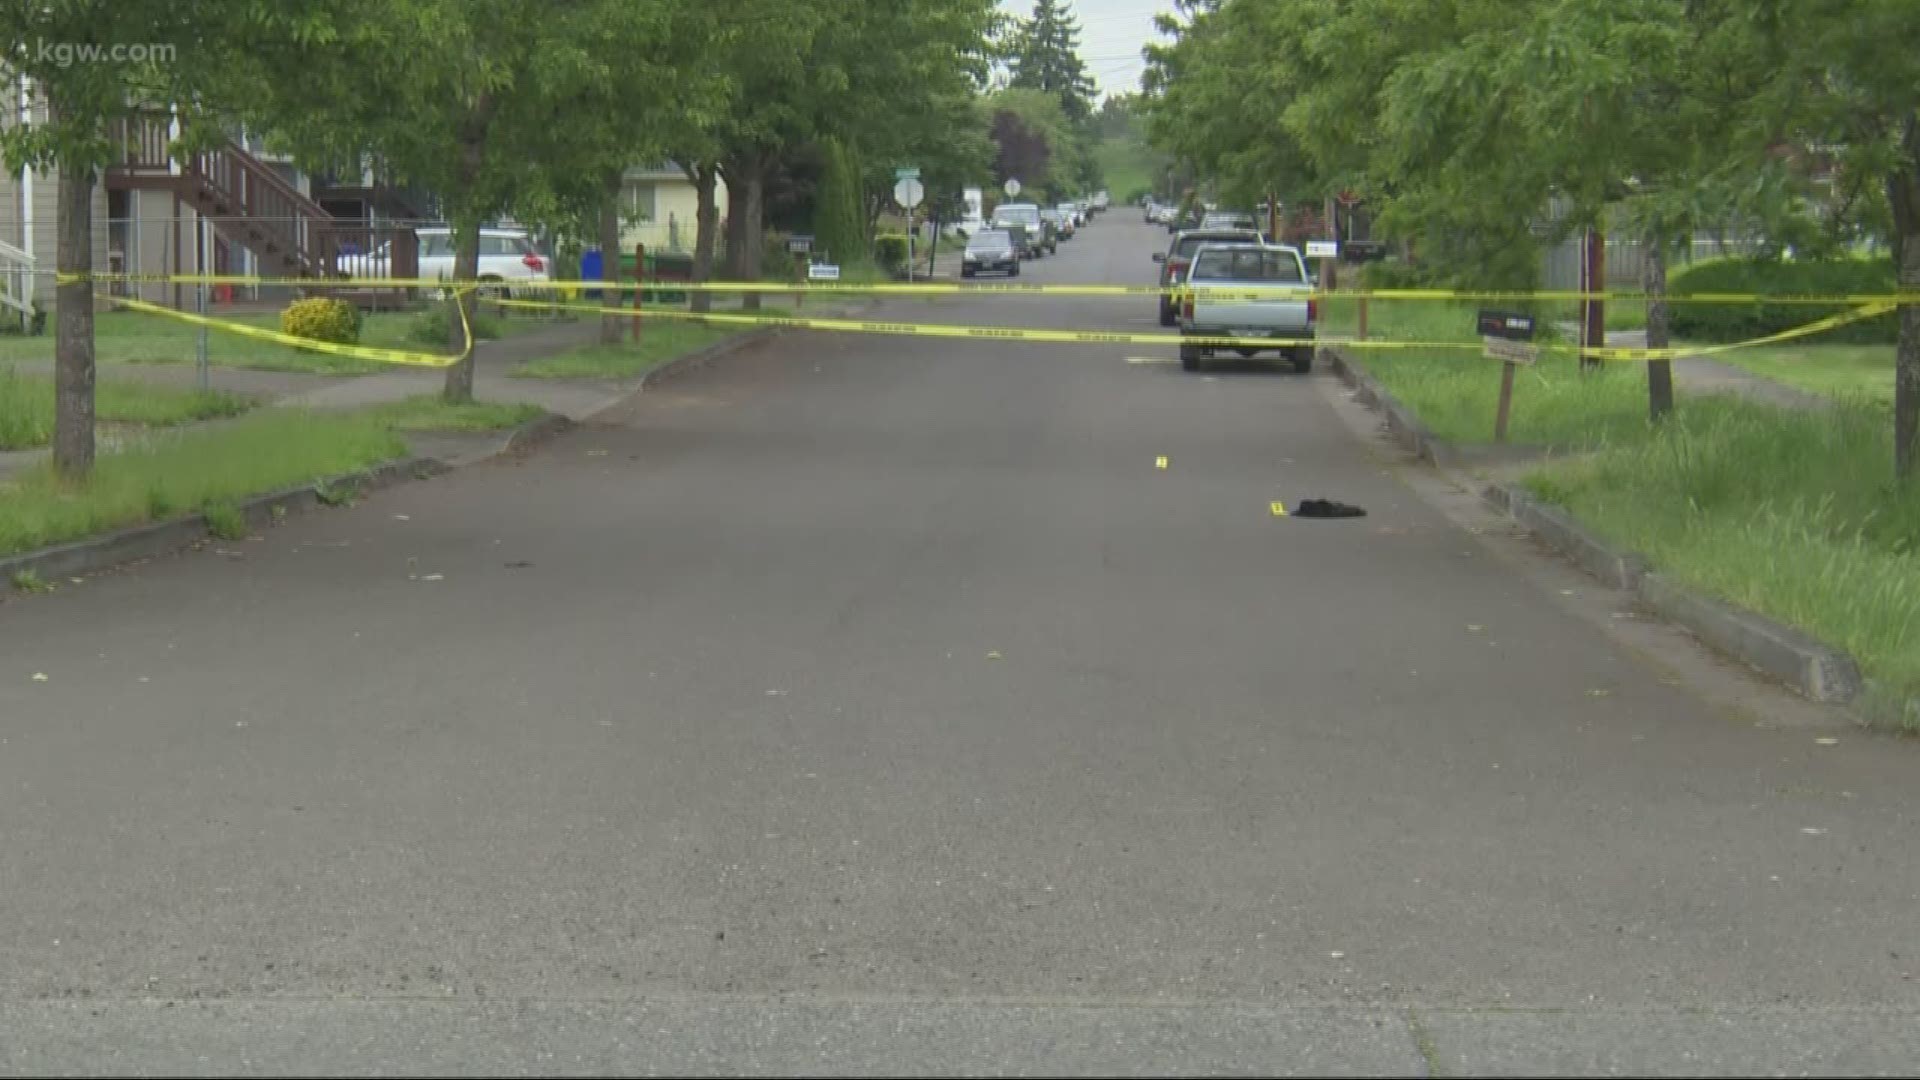 Body found in front yard of SE Portland home